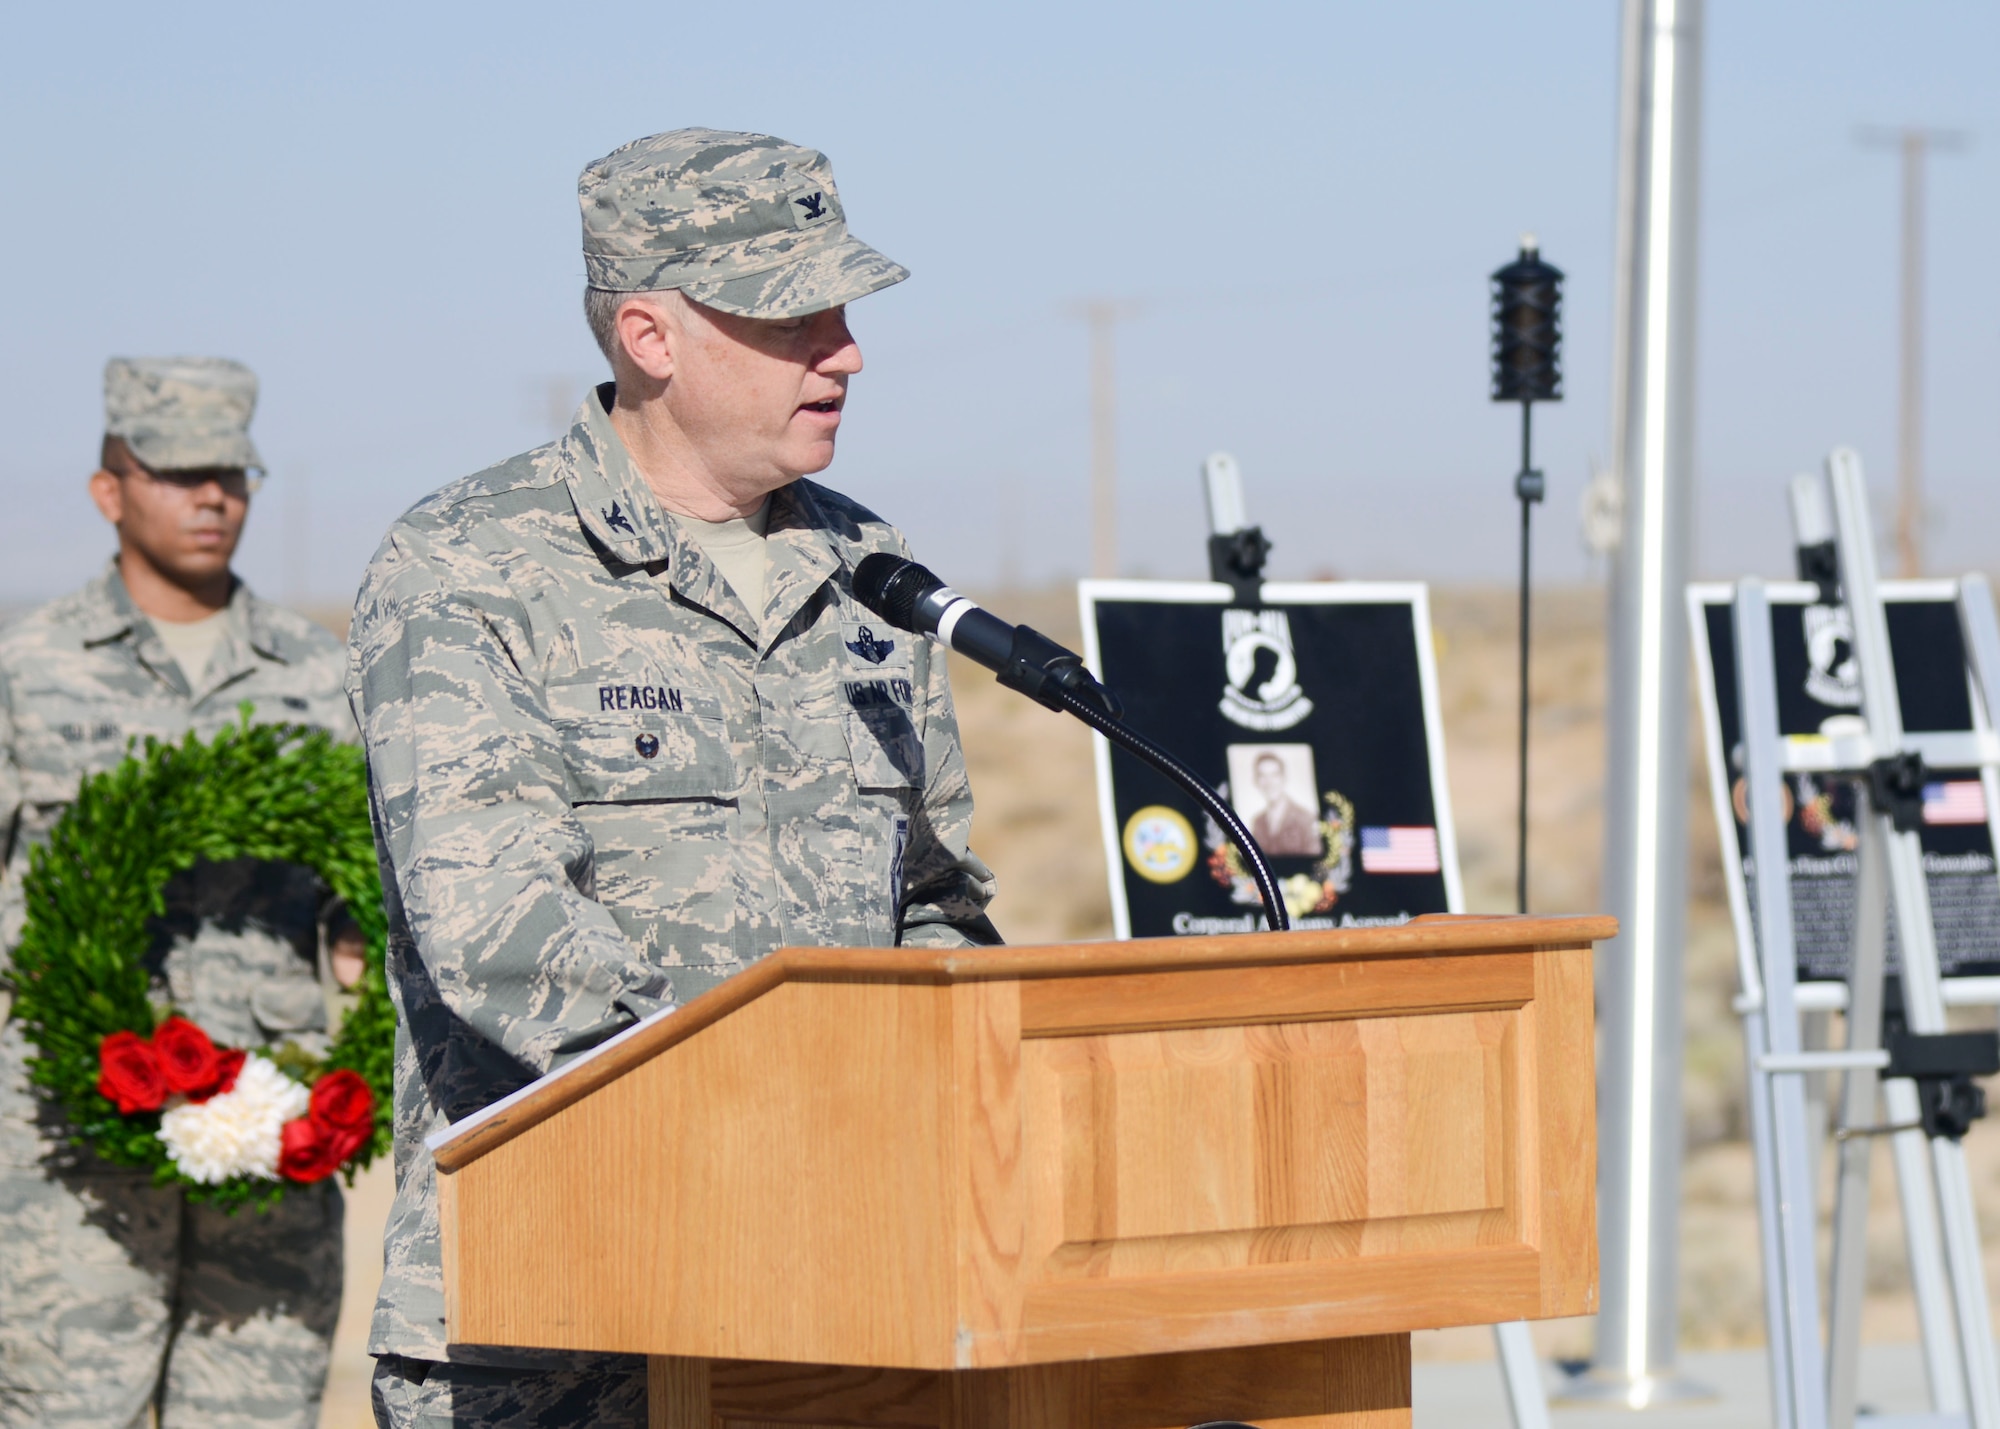 Col. Kirk Reagan, Vice Commander, 412th Test Wing, addresses those in attendance at a wreath-laying ceremony commemorating National POW/MIA Recognition Day at the Airman Leadership School Drill Pad at Edwards Air Force Base, California, Sept. 21. (U.S. Air Force photo by Giancarlo Casem)